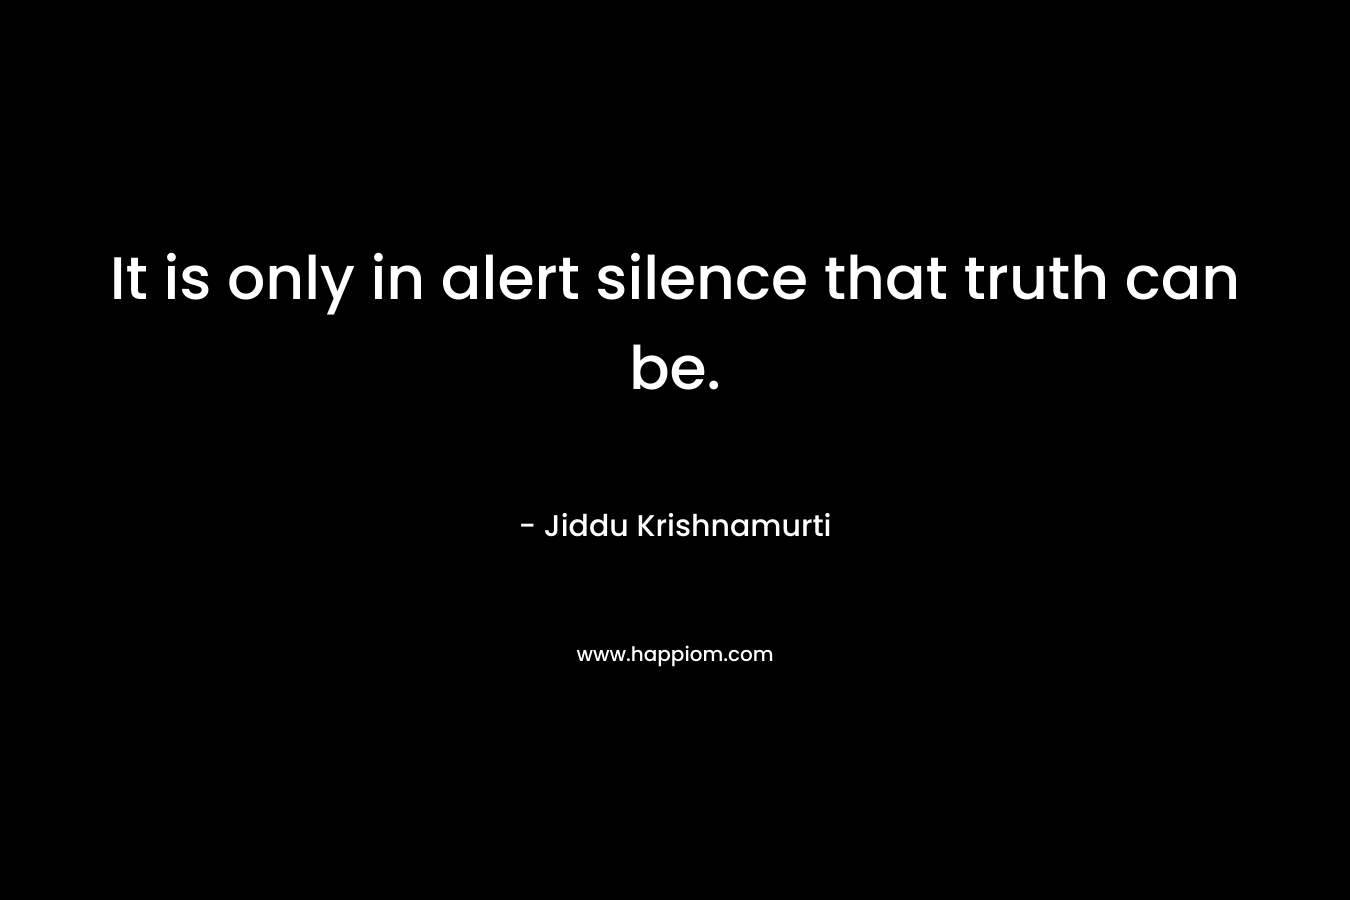 It is only in alert silence that truth can be.